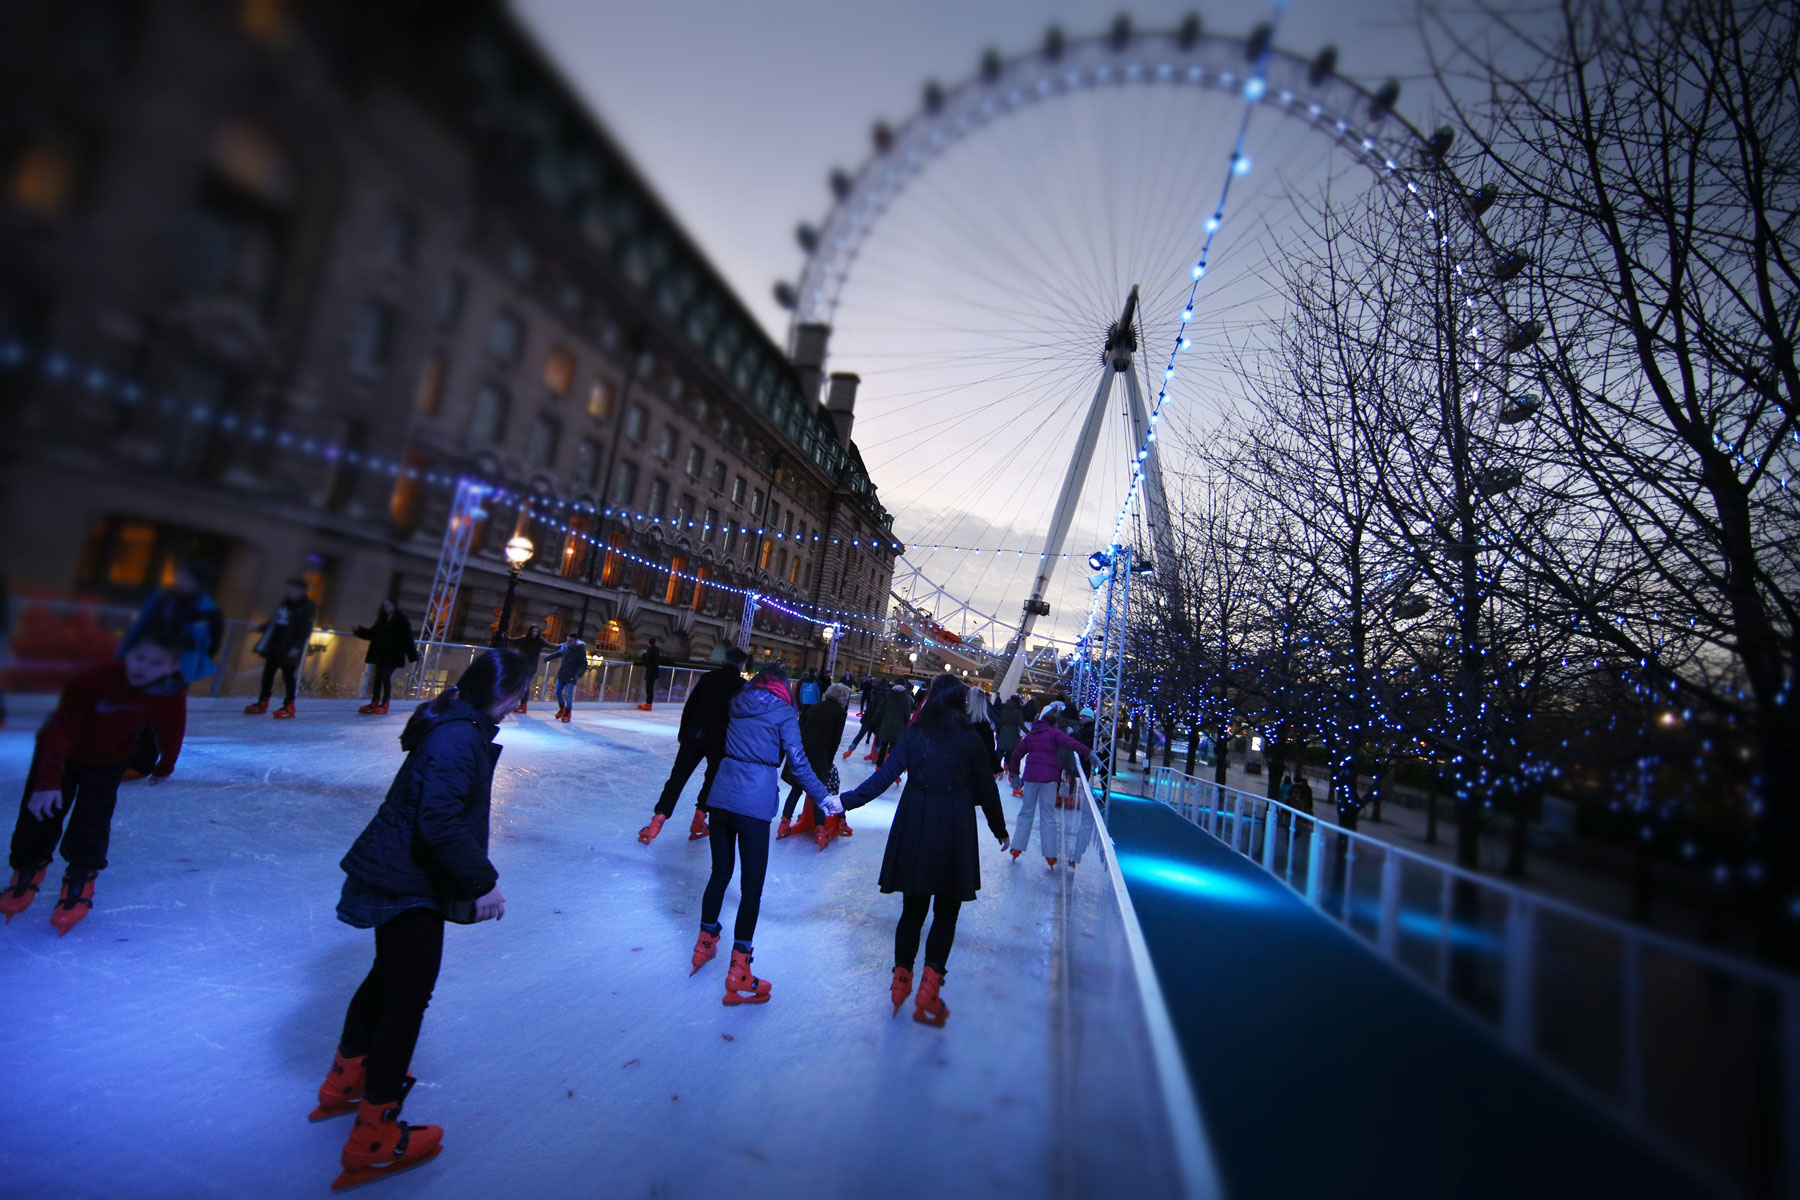 London Eye (EDITORS NOTE: This image has been processed with digital filters). LONDON, ENGLAND - DECEMBER 15: (EDITORS NOTE: This image has been processed with digital filters). People skate on the ice rink near The London Eye on December 15, 2014 in London, England. Currently 12 seasonal ice rinks function during winter in London. (Photo by Peter Macdiarmid/Getty Images)